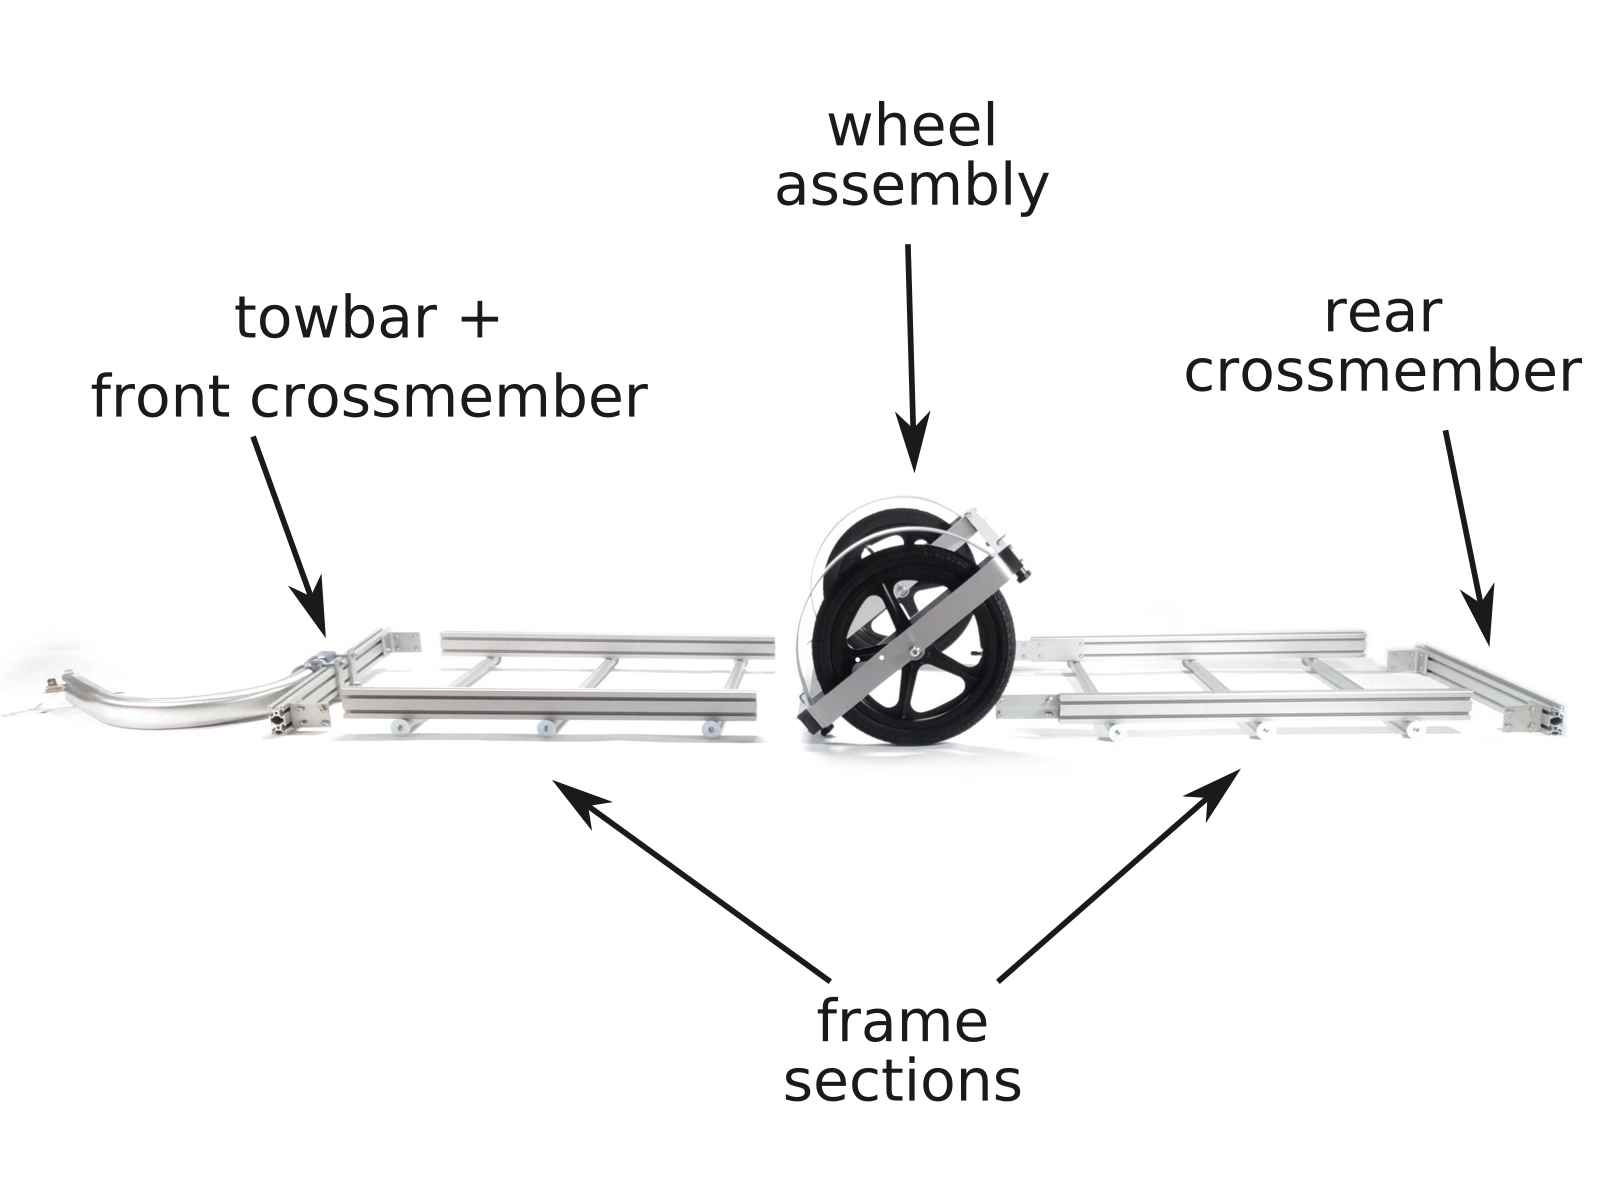 breakdown of 64B trailer into towbar + front crossmember, wheel assembly, rear crossmember, and two frame sections